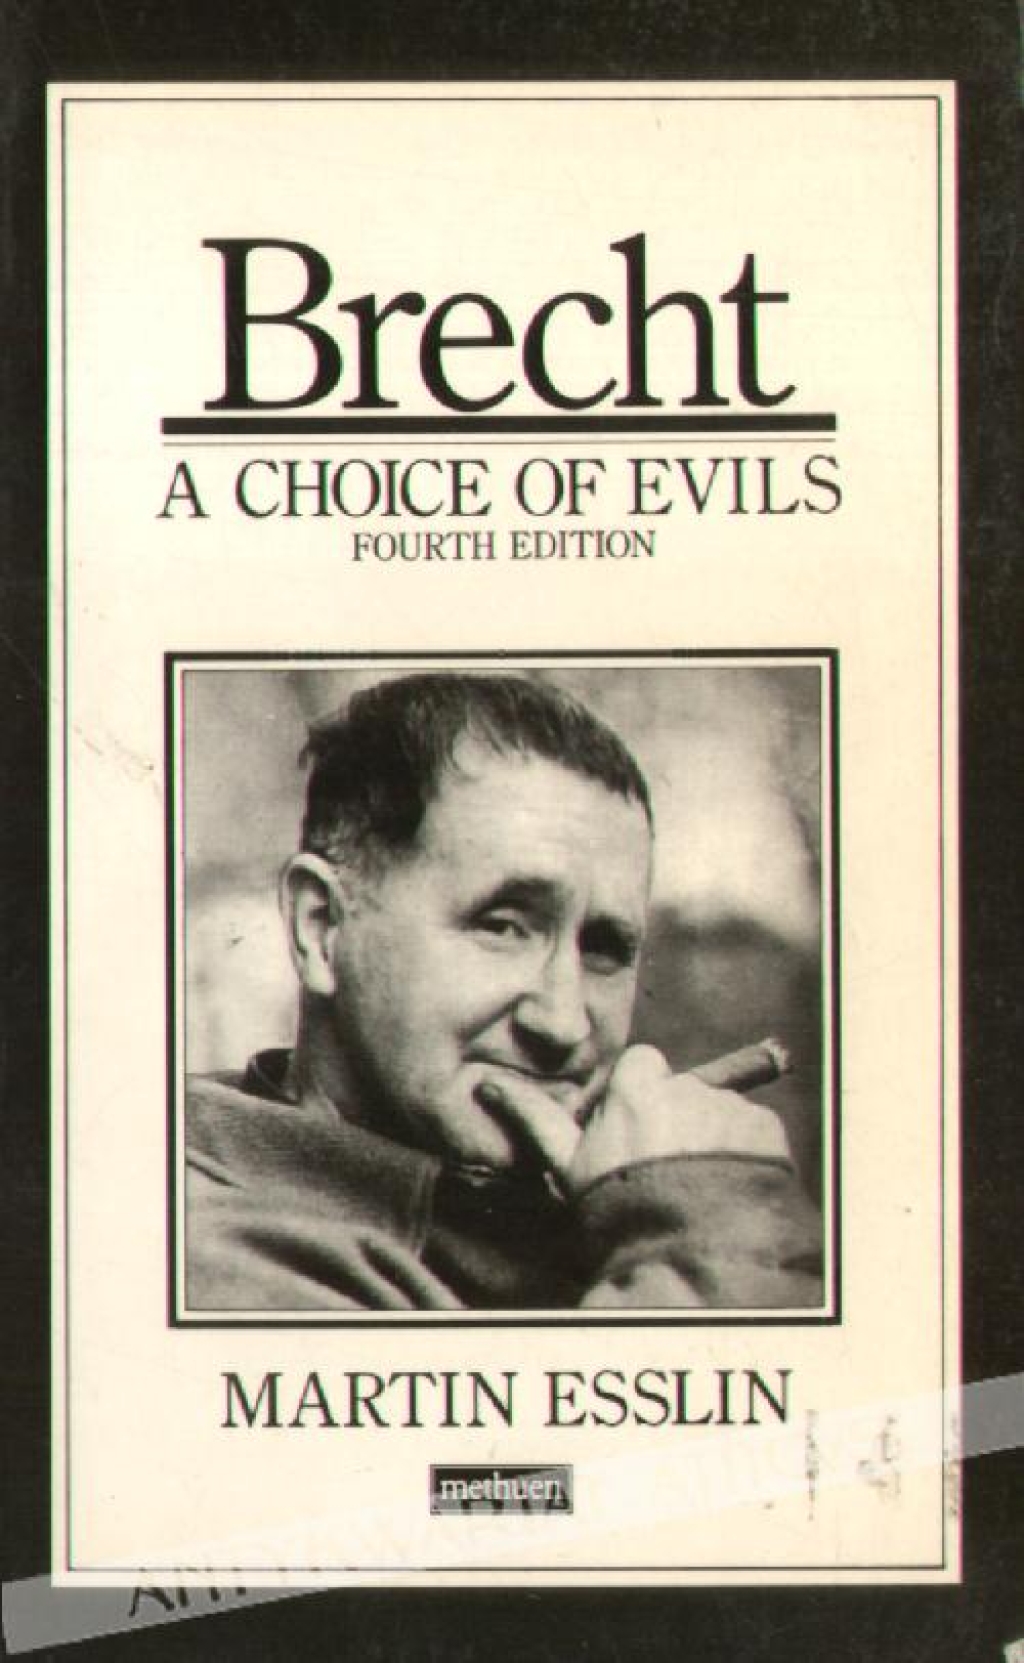 Brecht: A Choice of Evils. A critical study of the man, his work and his opinions